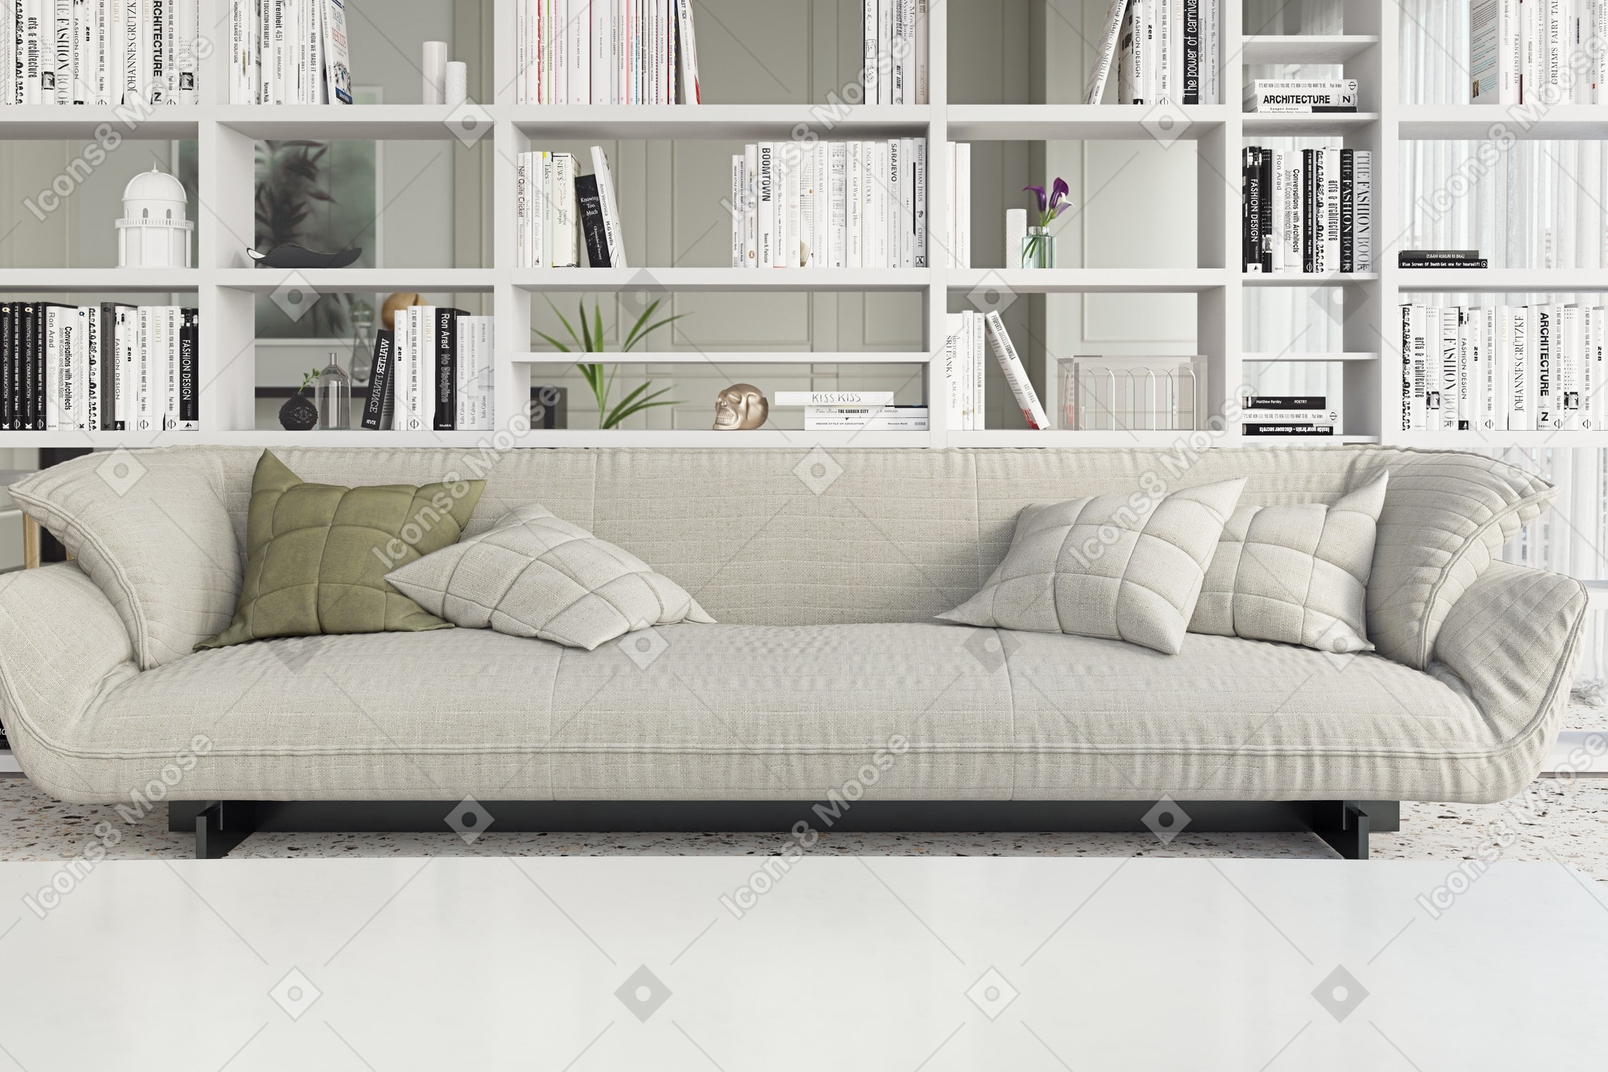 A white sofa in a living room